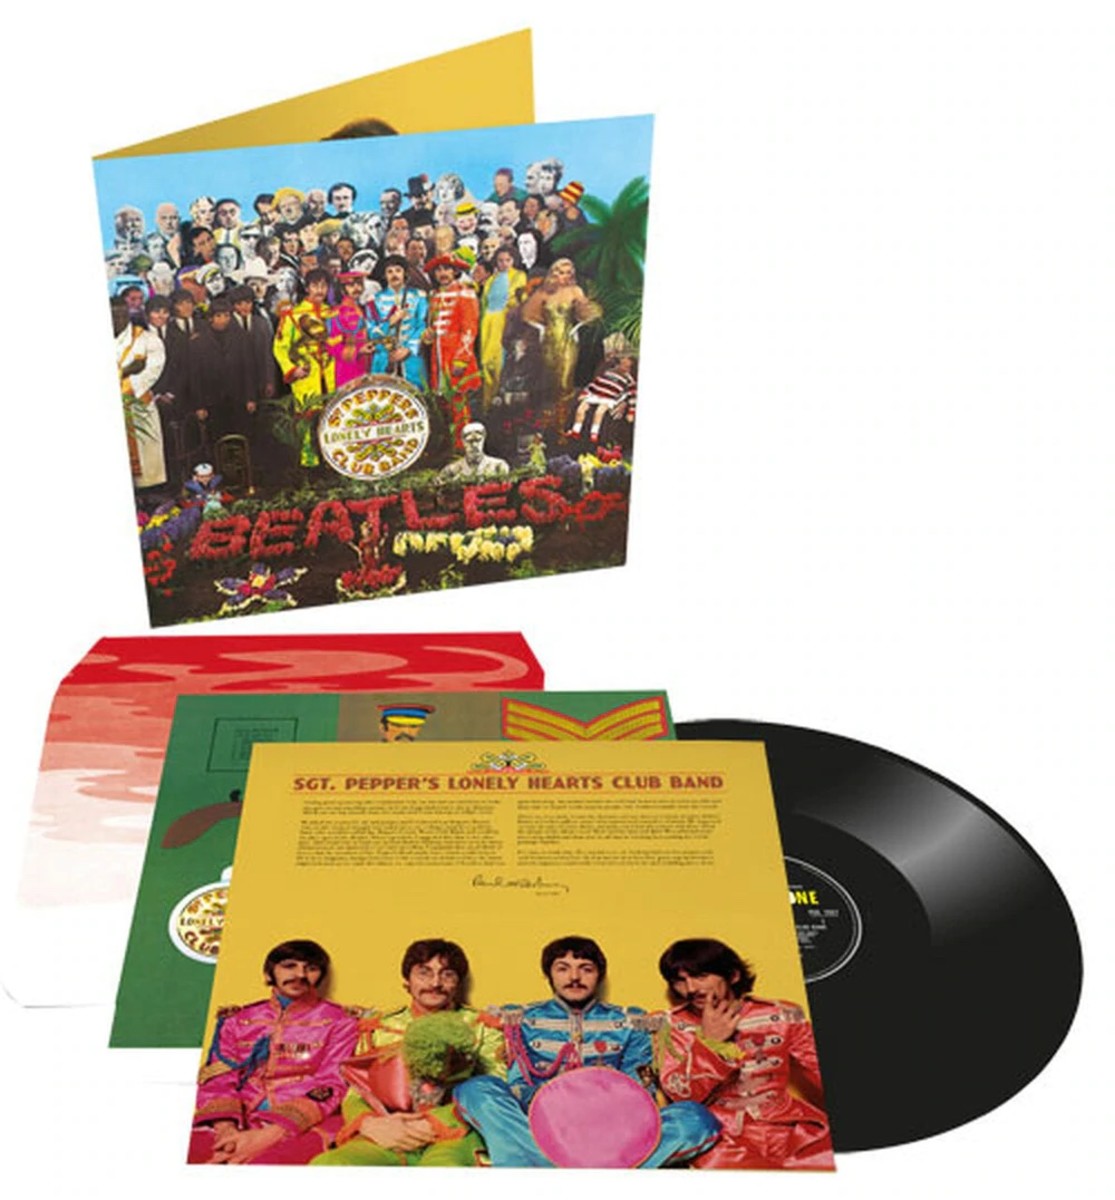 Limited 180gm vinyl LP pressing of 2017 remix of The Beatles' Sgt. Pepper's Lonely Hearts Club Band.